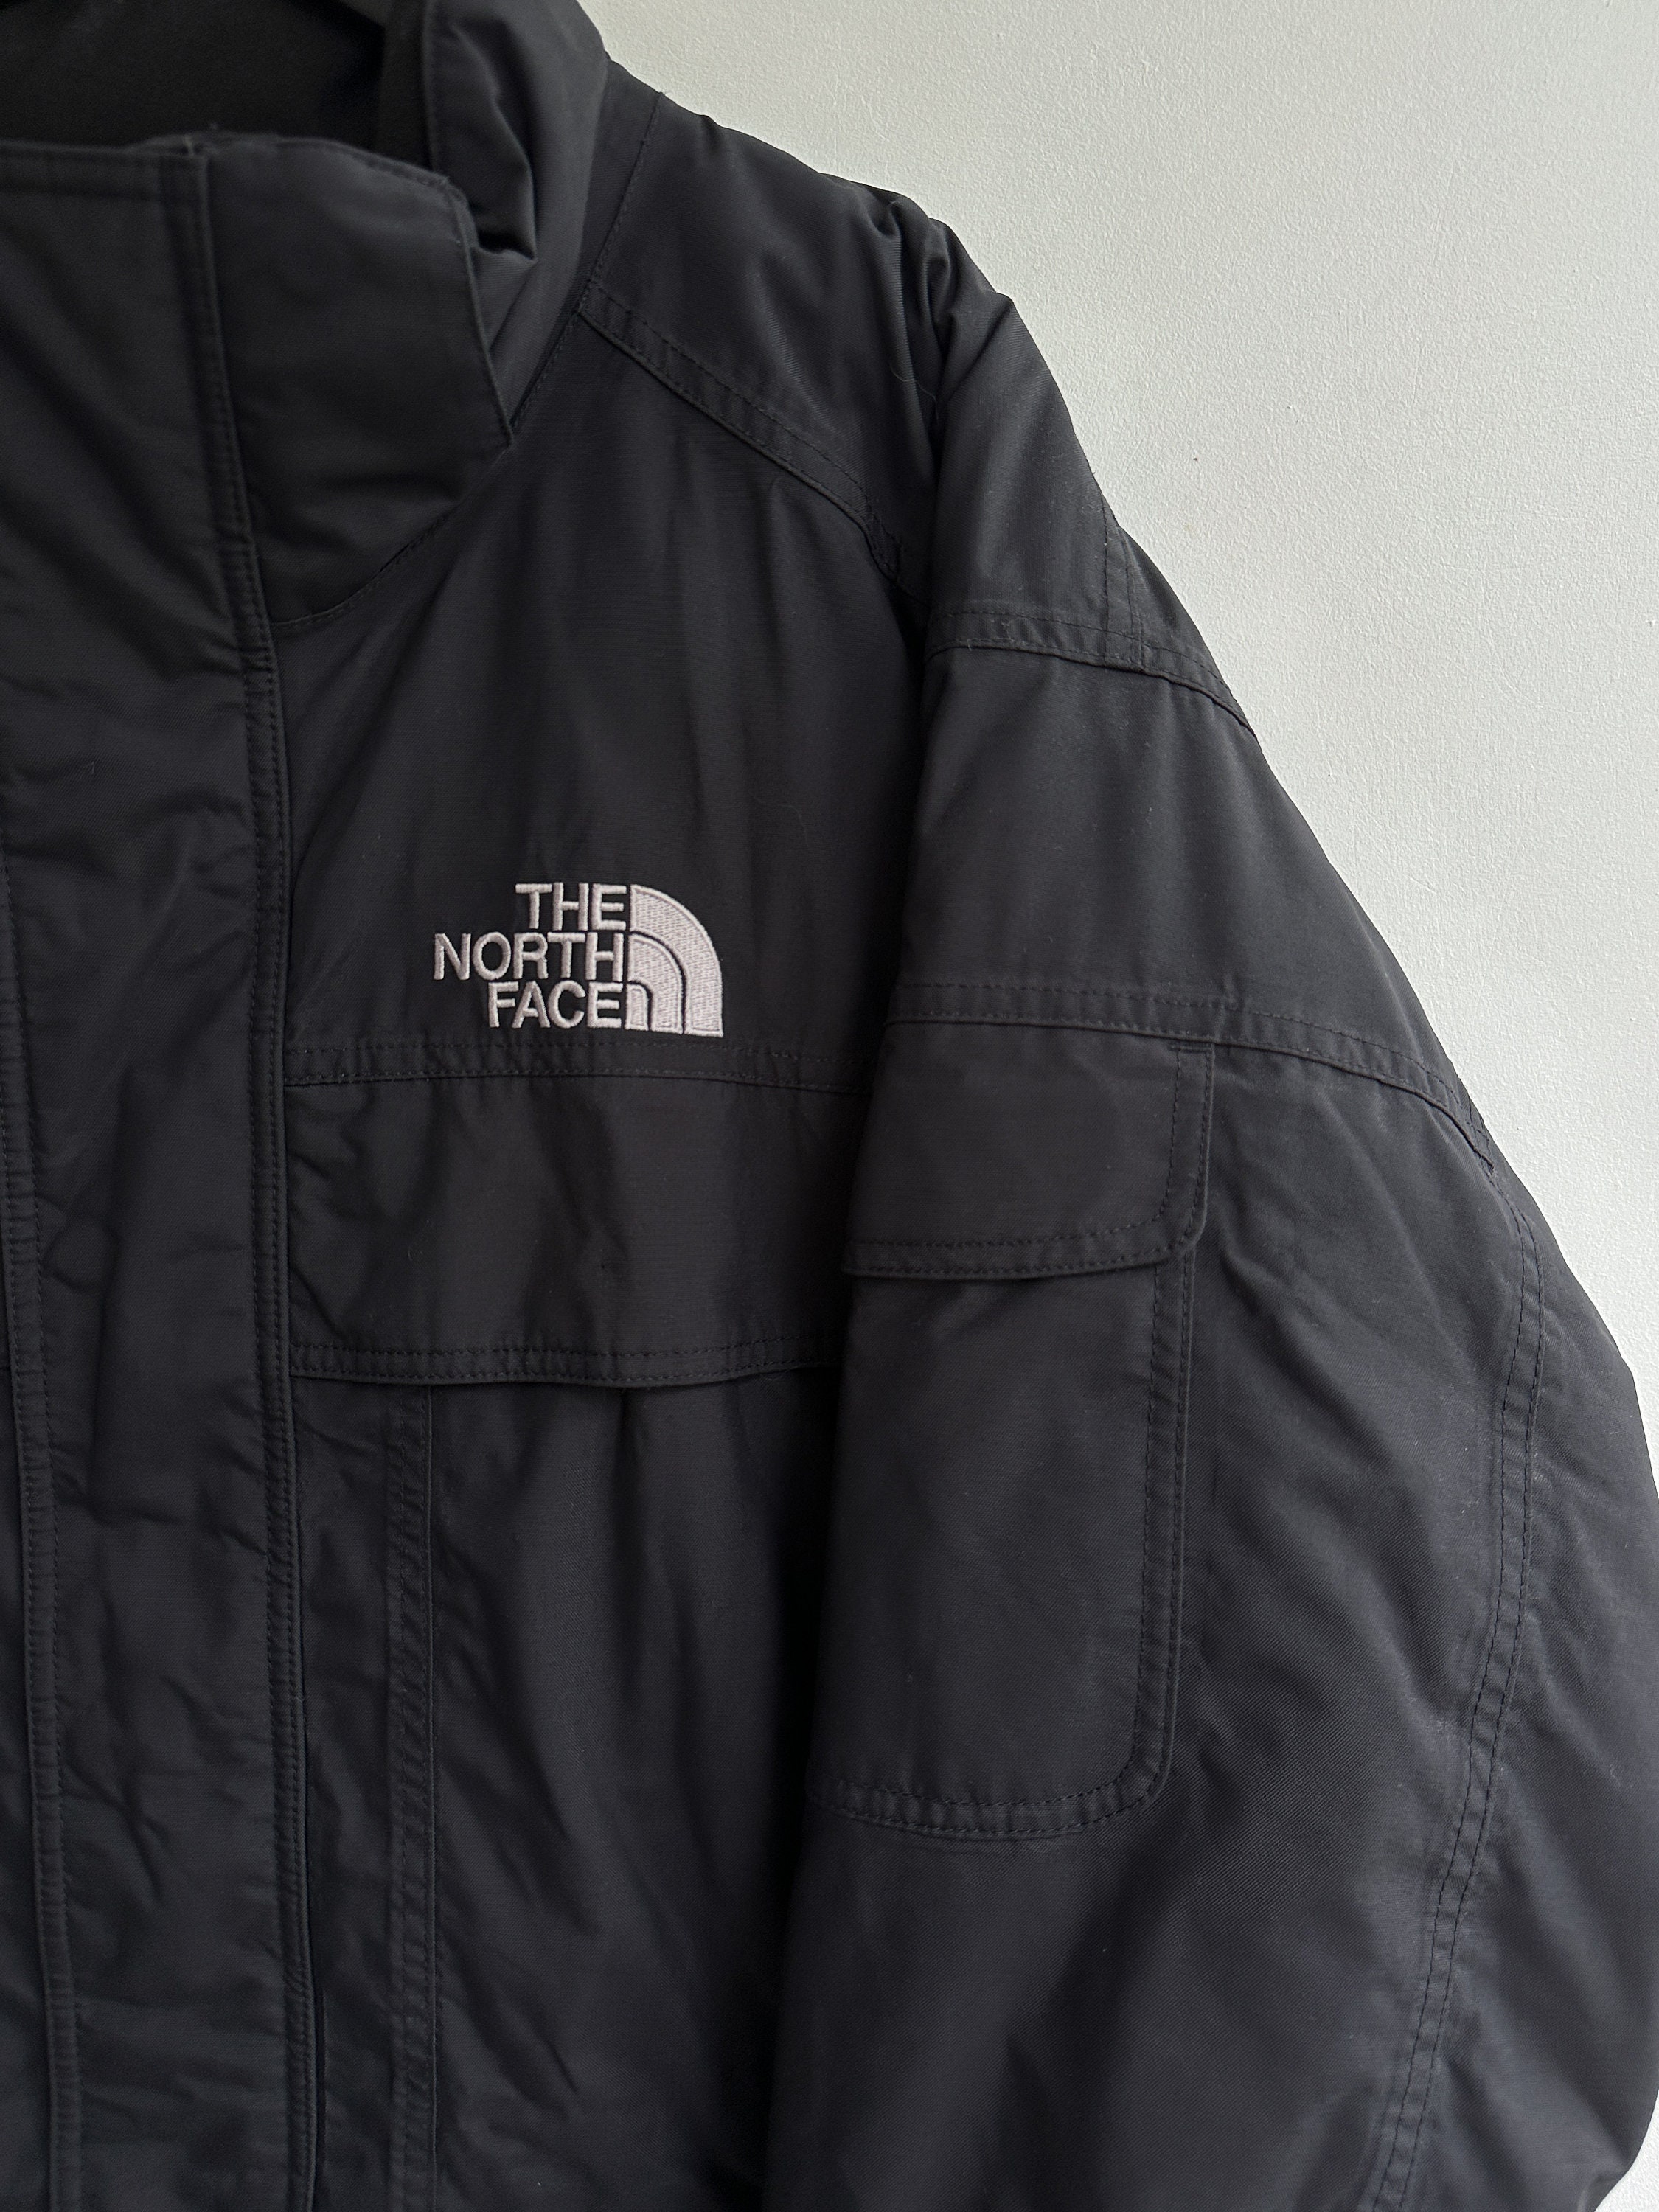 The North Face Mcmurdo Hyvent Goose Down Coat Jacket Parka 